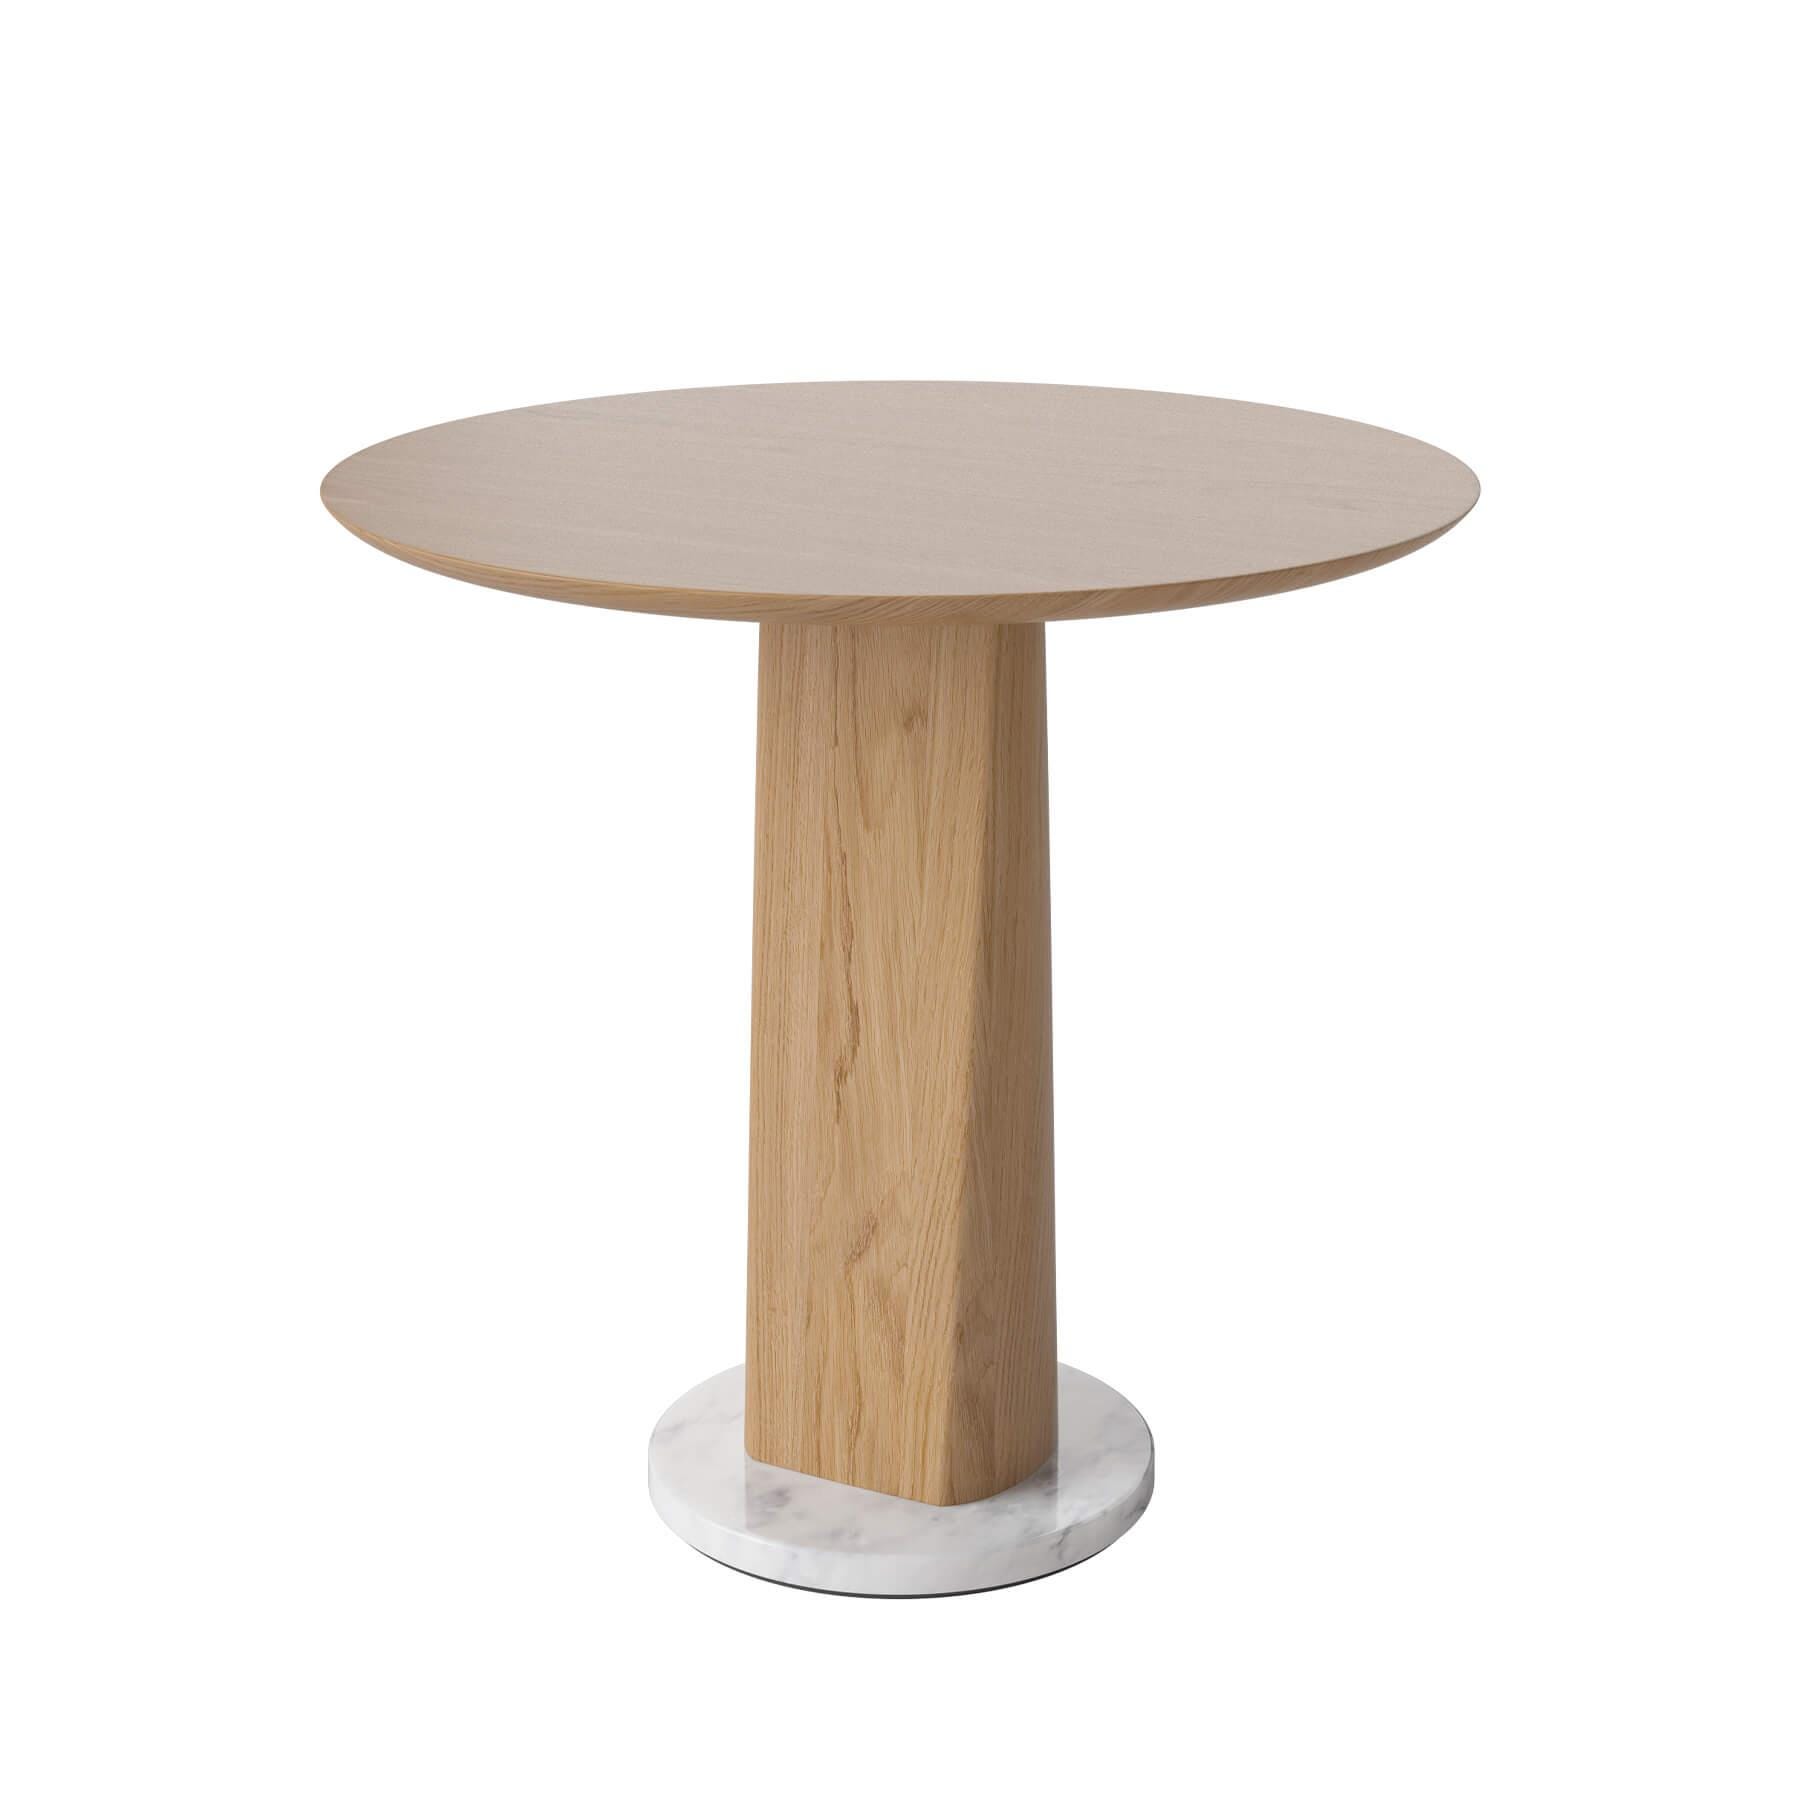 Bolia Root Side Table Large High Oiled Oak Light Wood Designer Furniture From Holloways Of Ludlow